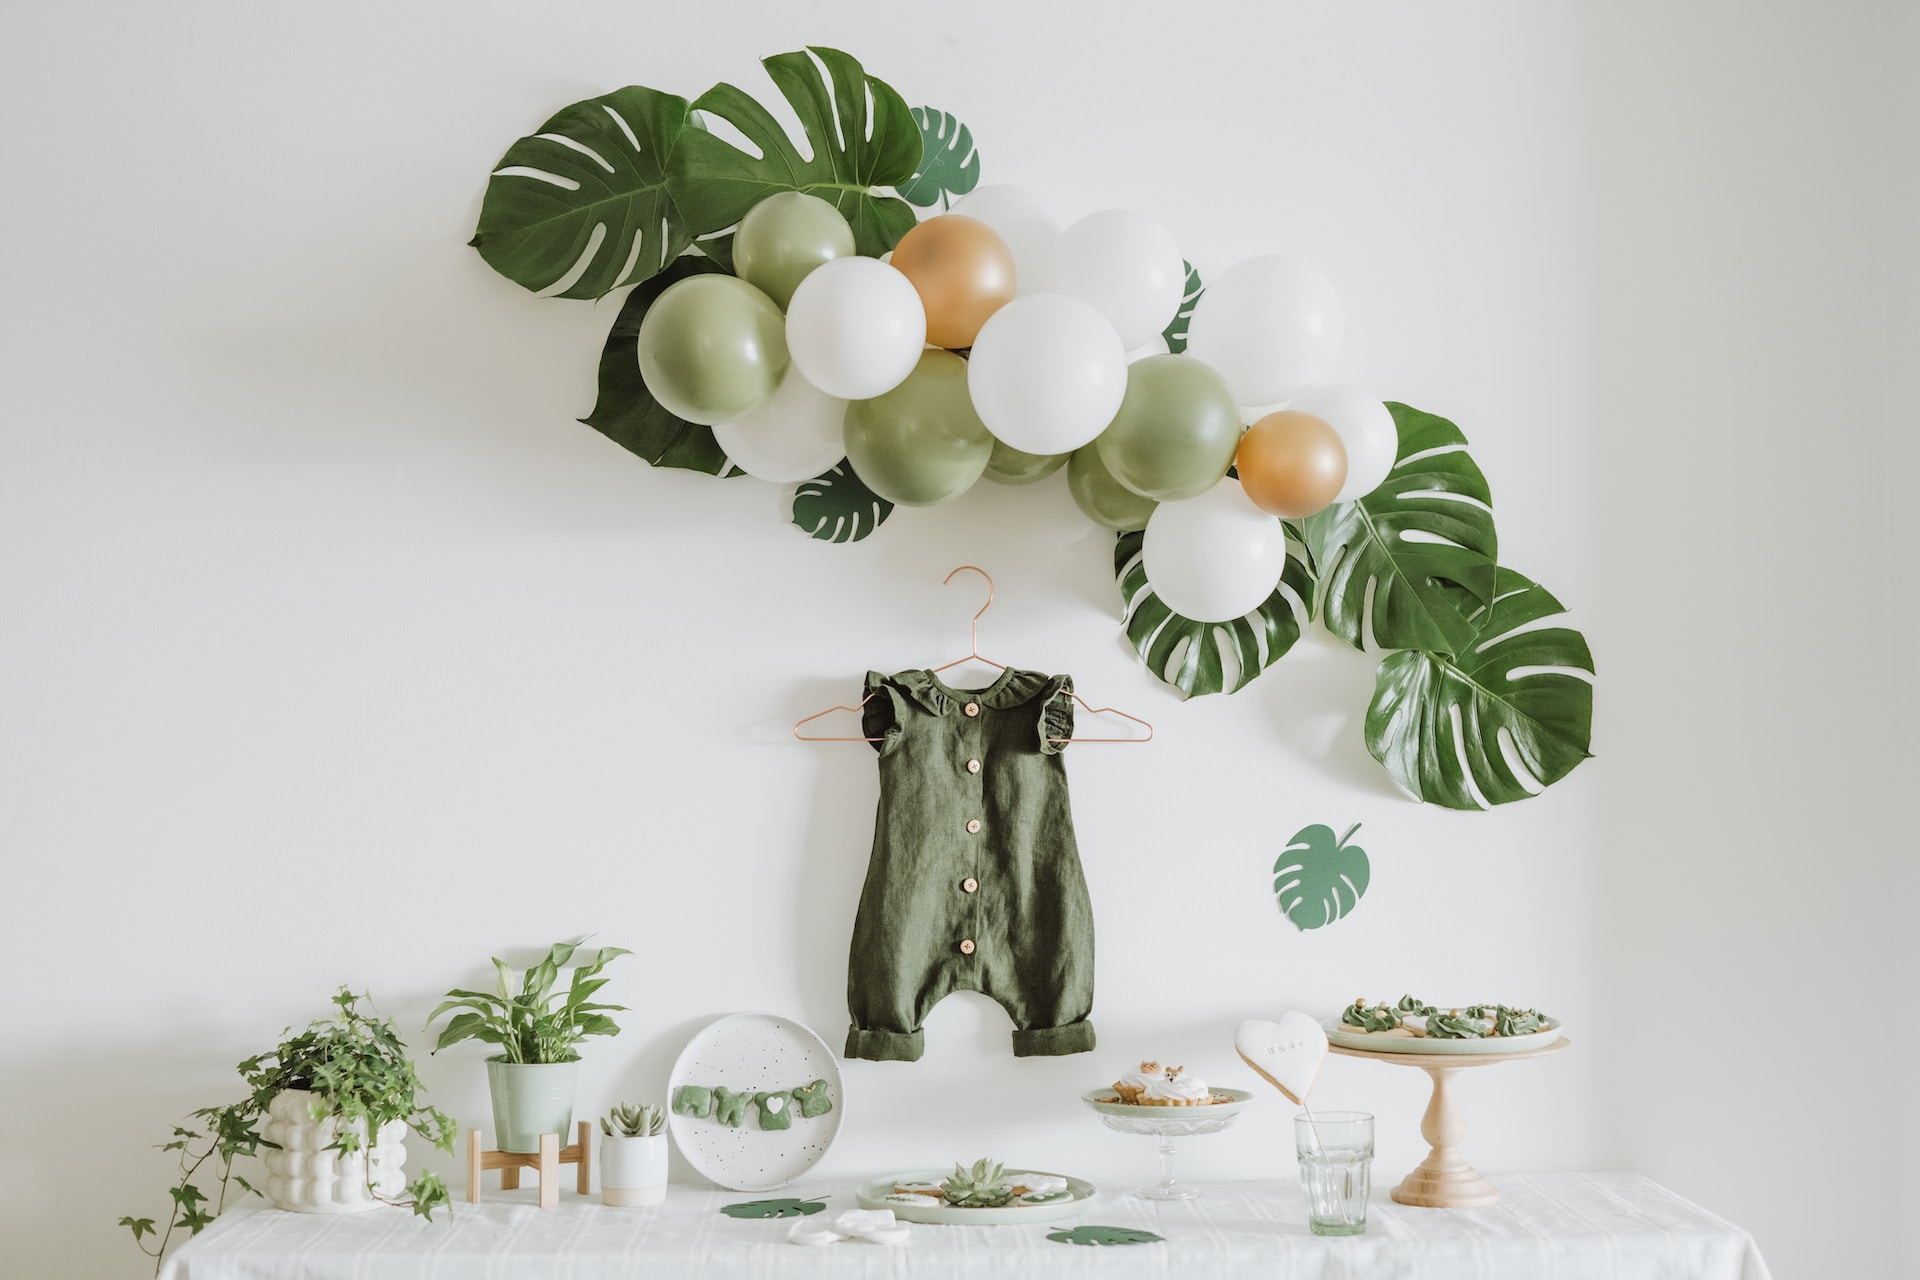 Baby shower decorations on a white tablecloth. Green bab pinafore hangs on the wall above table. 